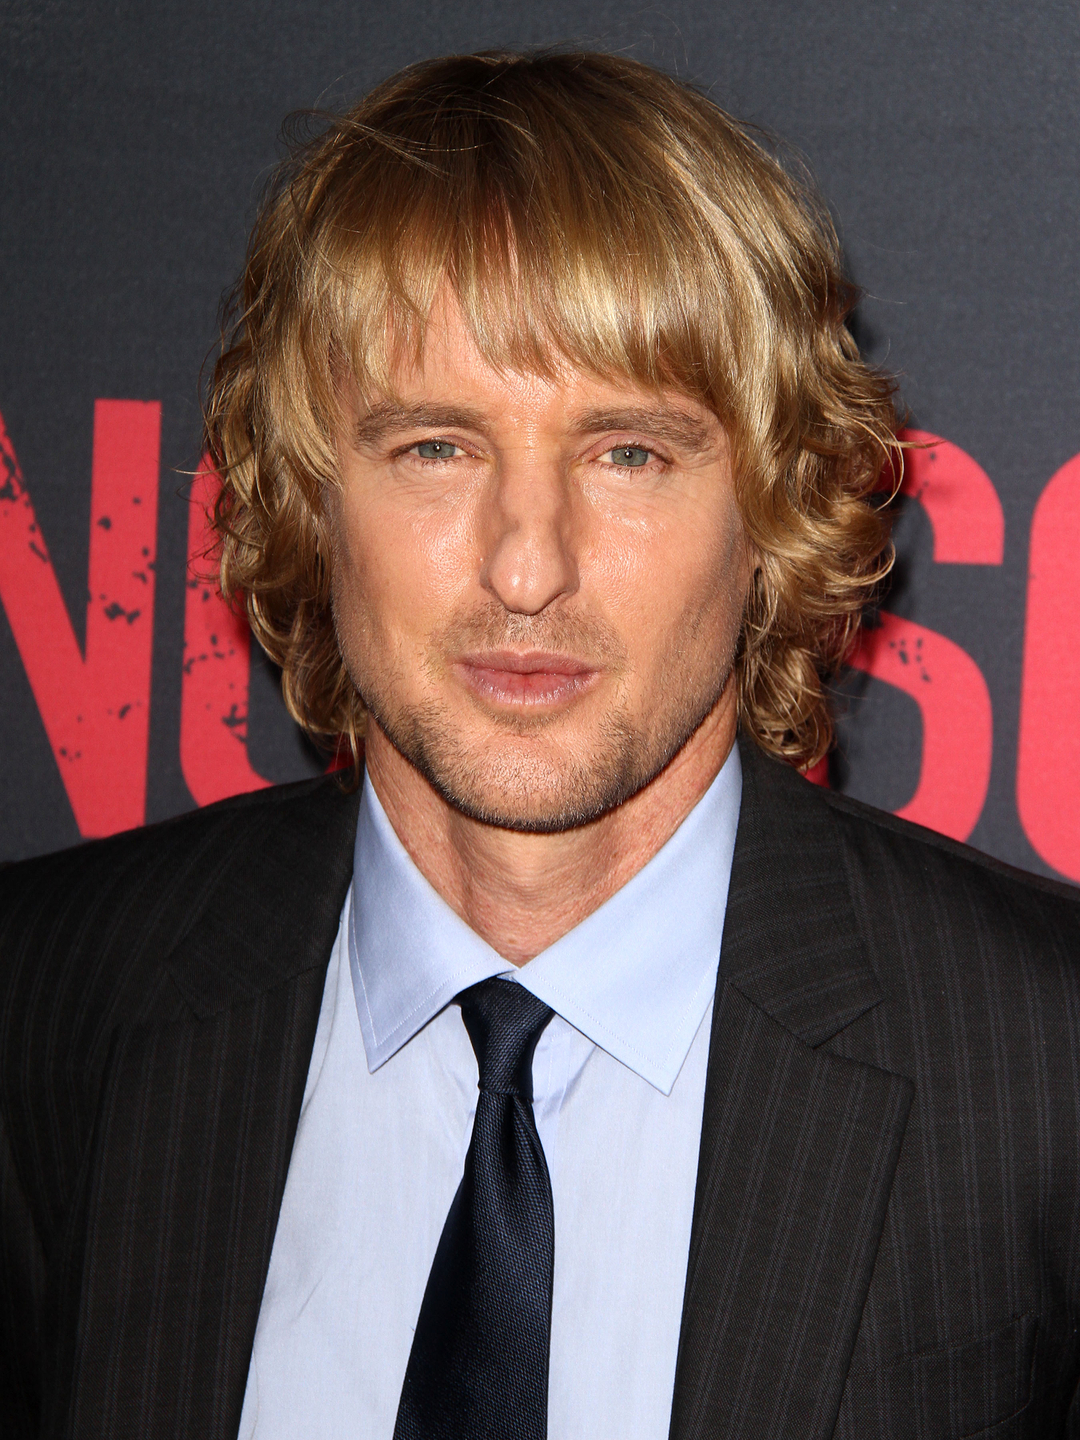 Owen Wilson how did he became famous